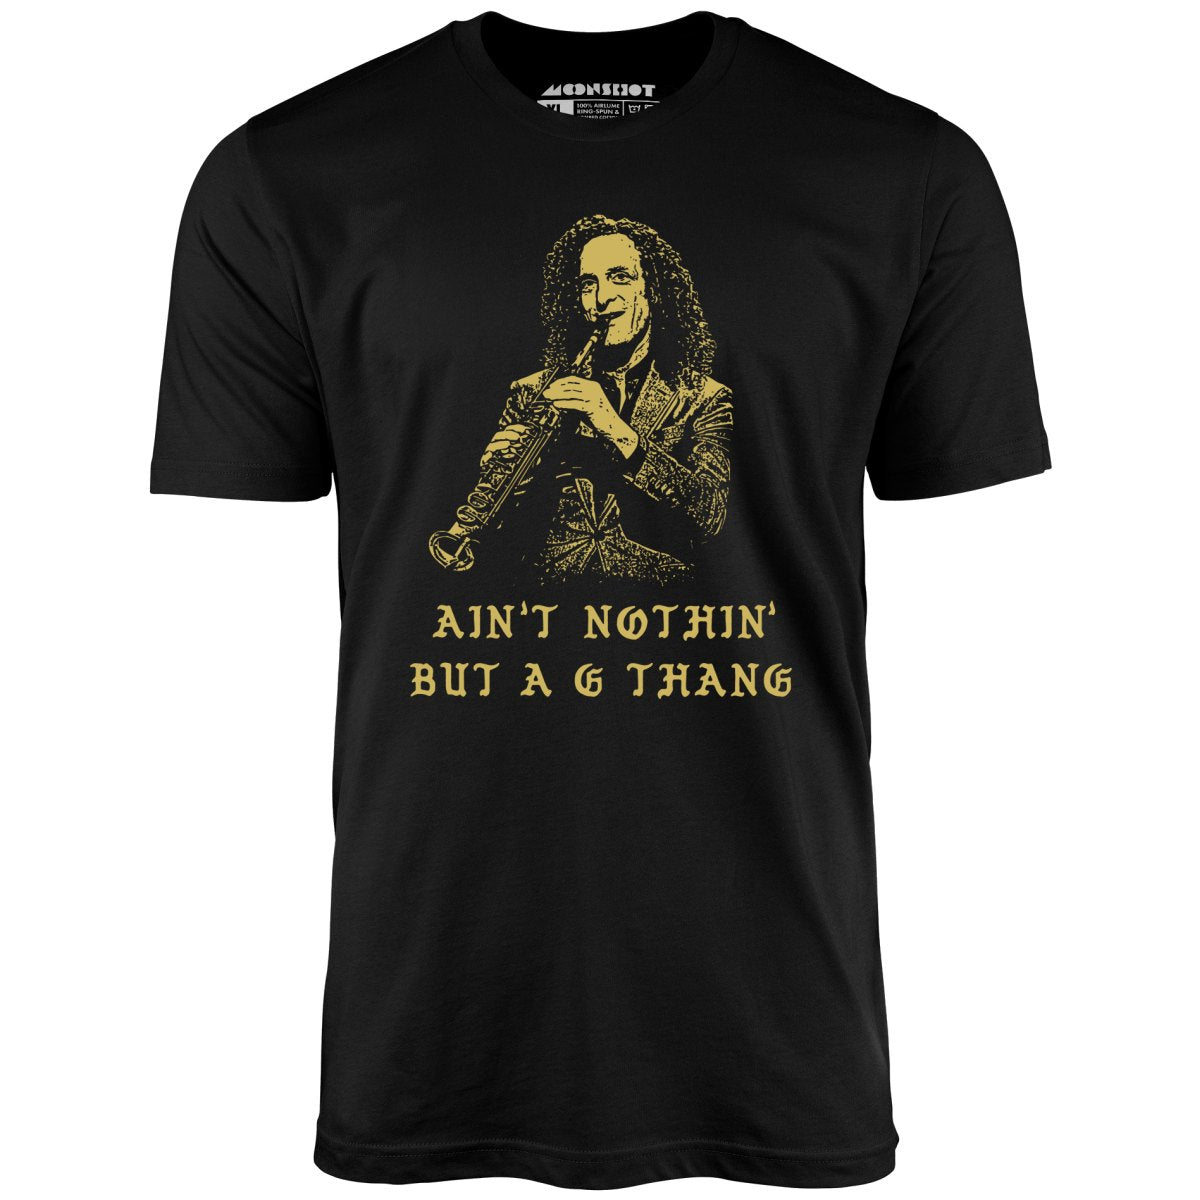 Ain't Nothin' But a G Thang - Unisex T-Shirt